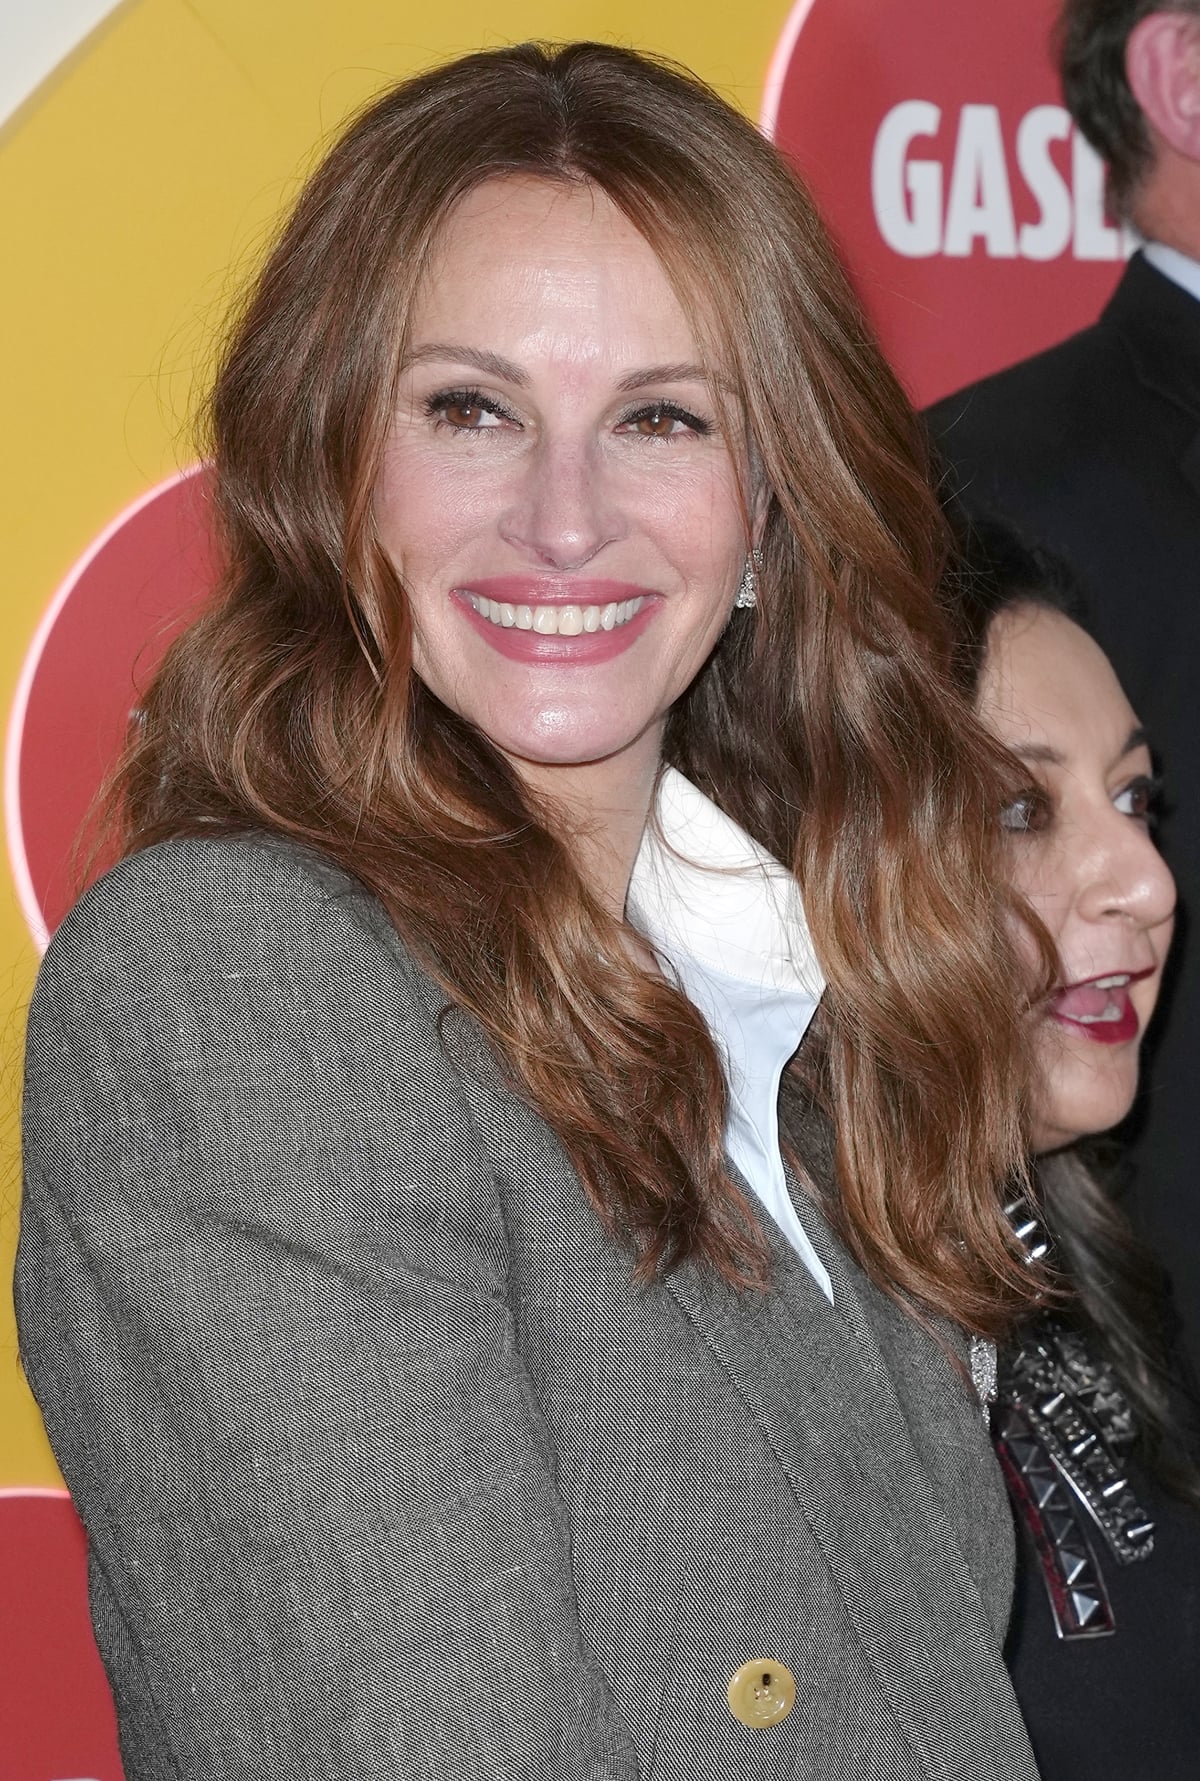 Julia Roberts flashes her signature smile at the premiere of her American political thriller limited television series Gaslit